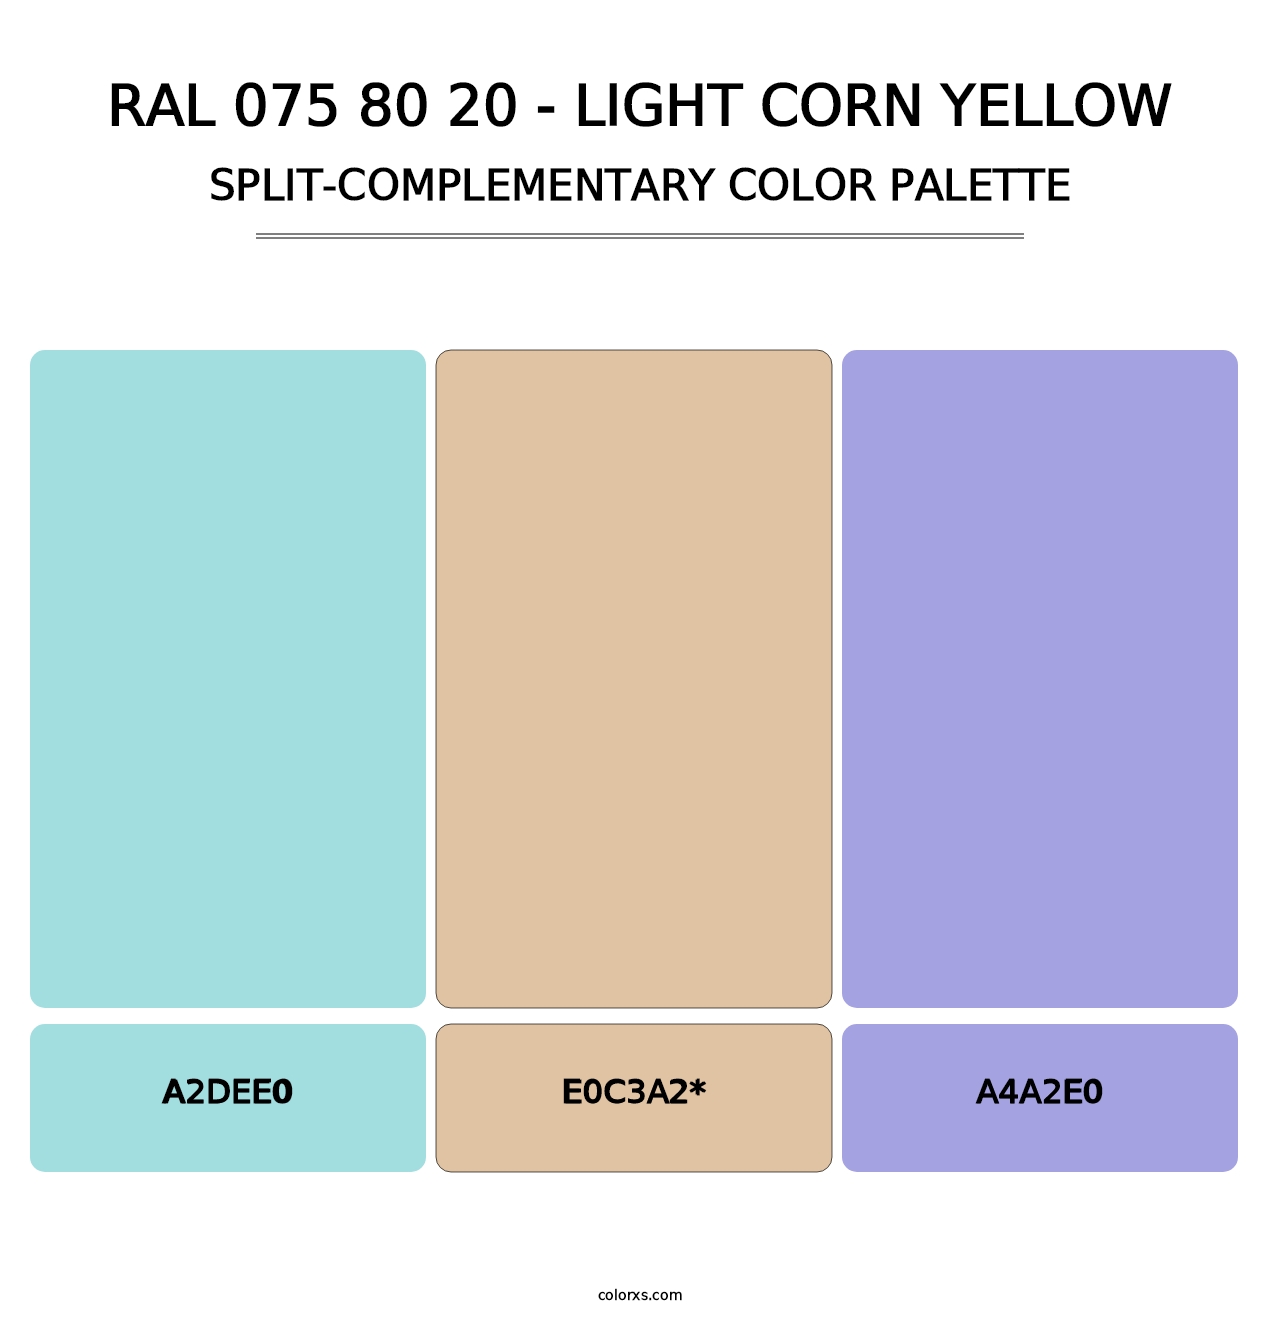 RAL 075 80 20 - Light Corn Yellow - Split-Complementary Color Palette